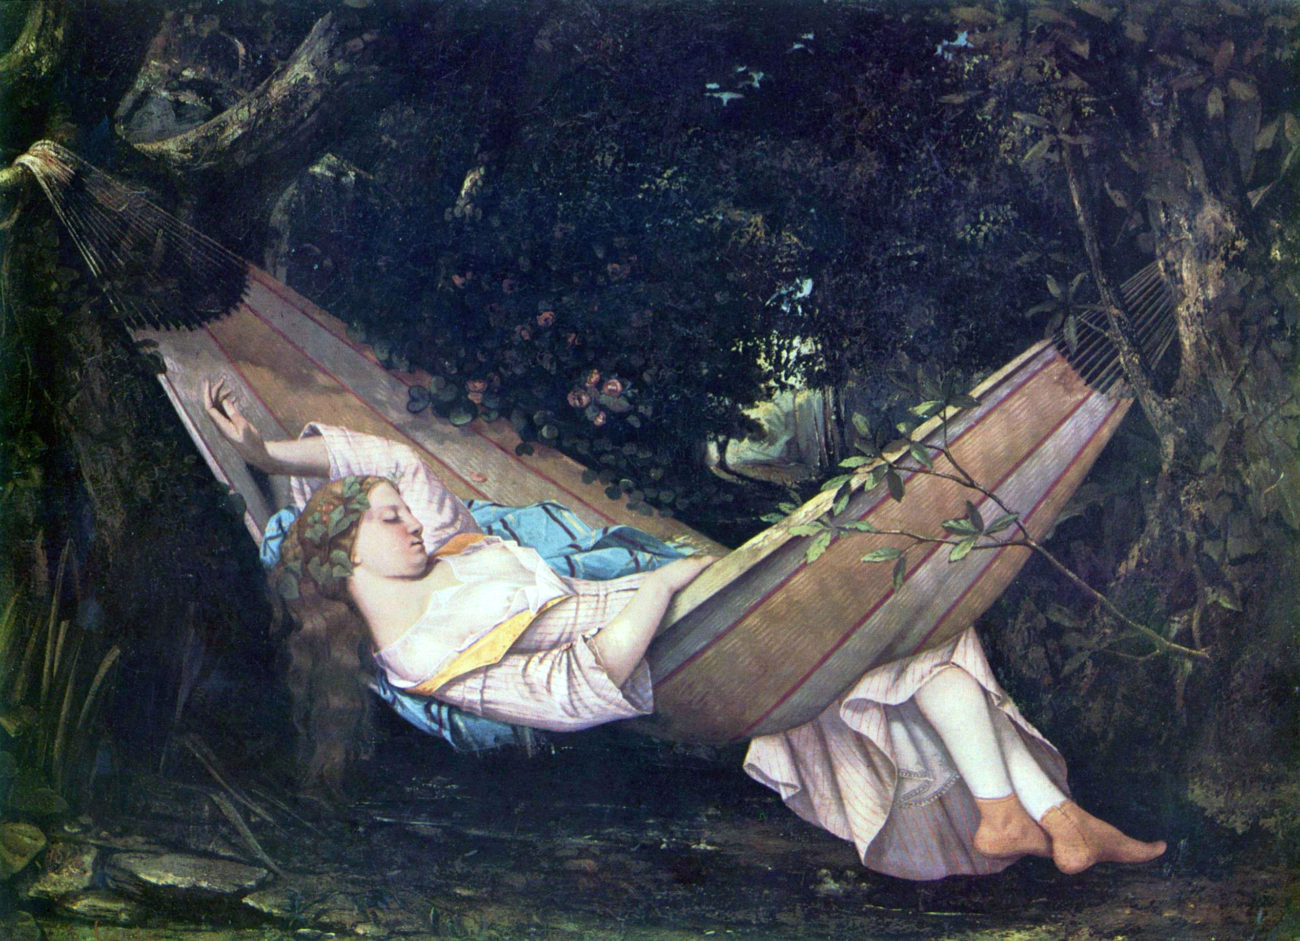 The Hammock, painted in 1844 by Gustave Courbet